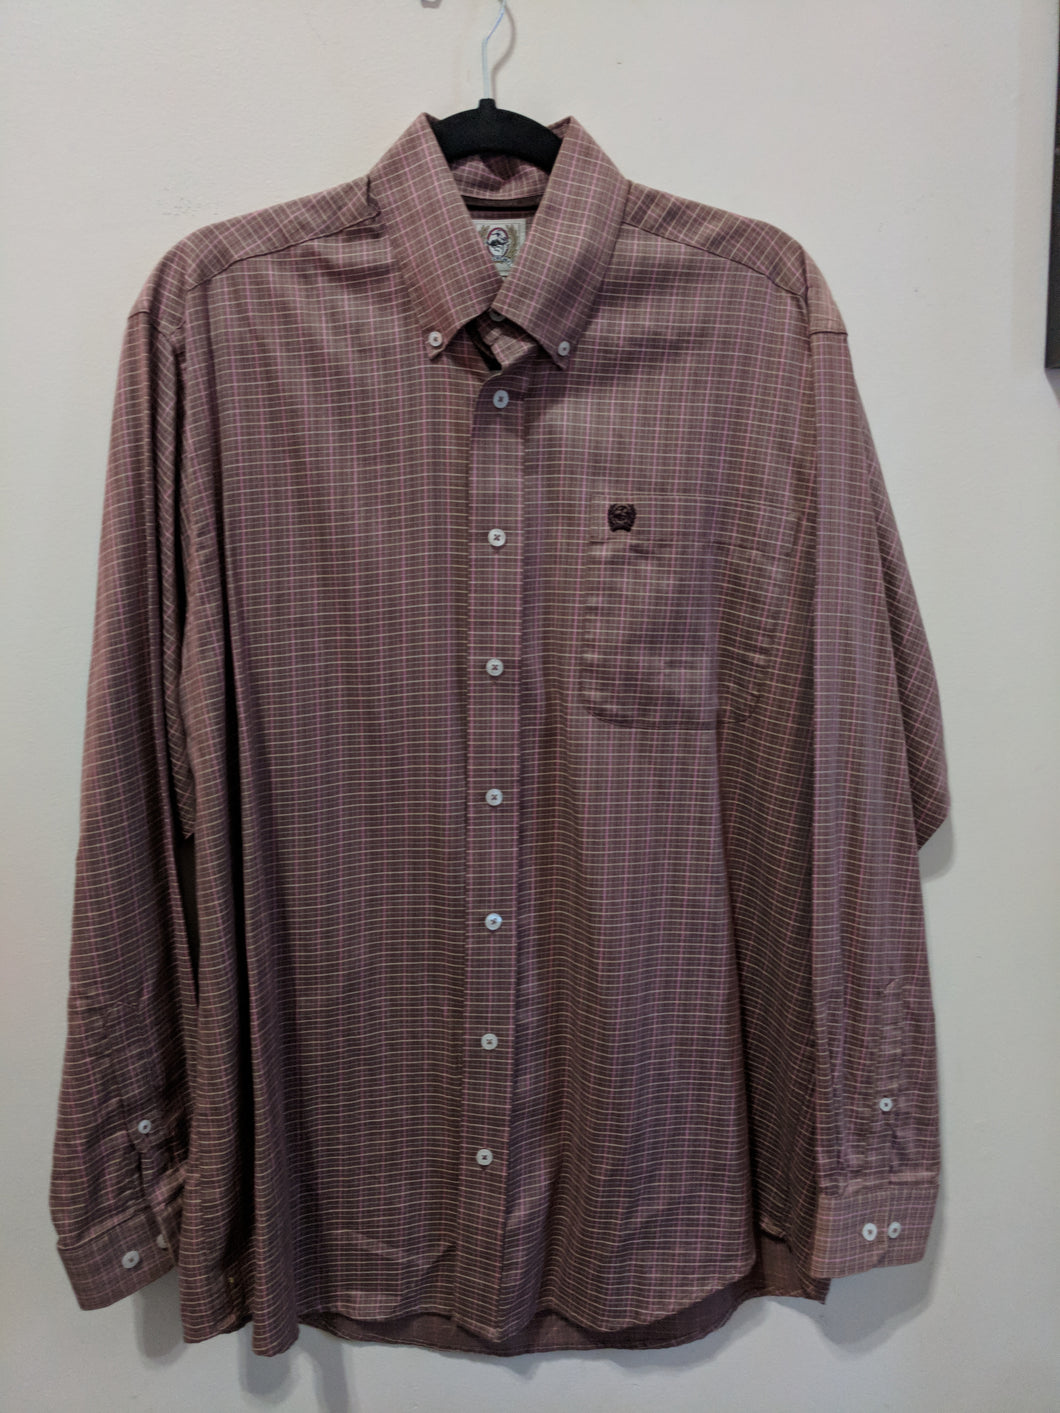 Clearance Sale Cinch Men's Plaid Shirt size Small Mocha/Pink New